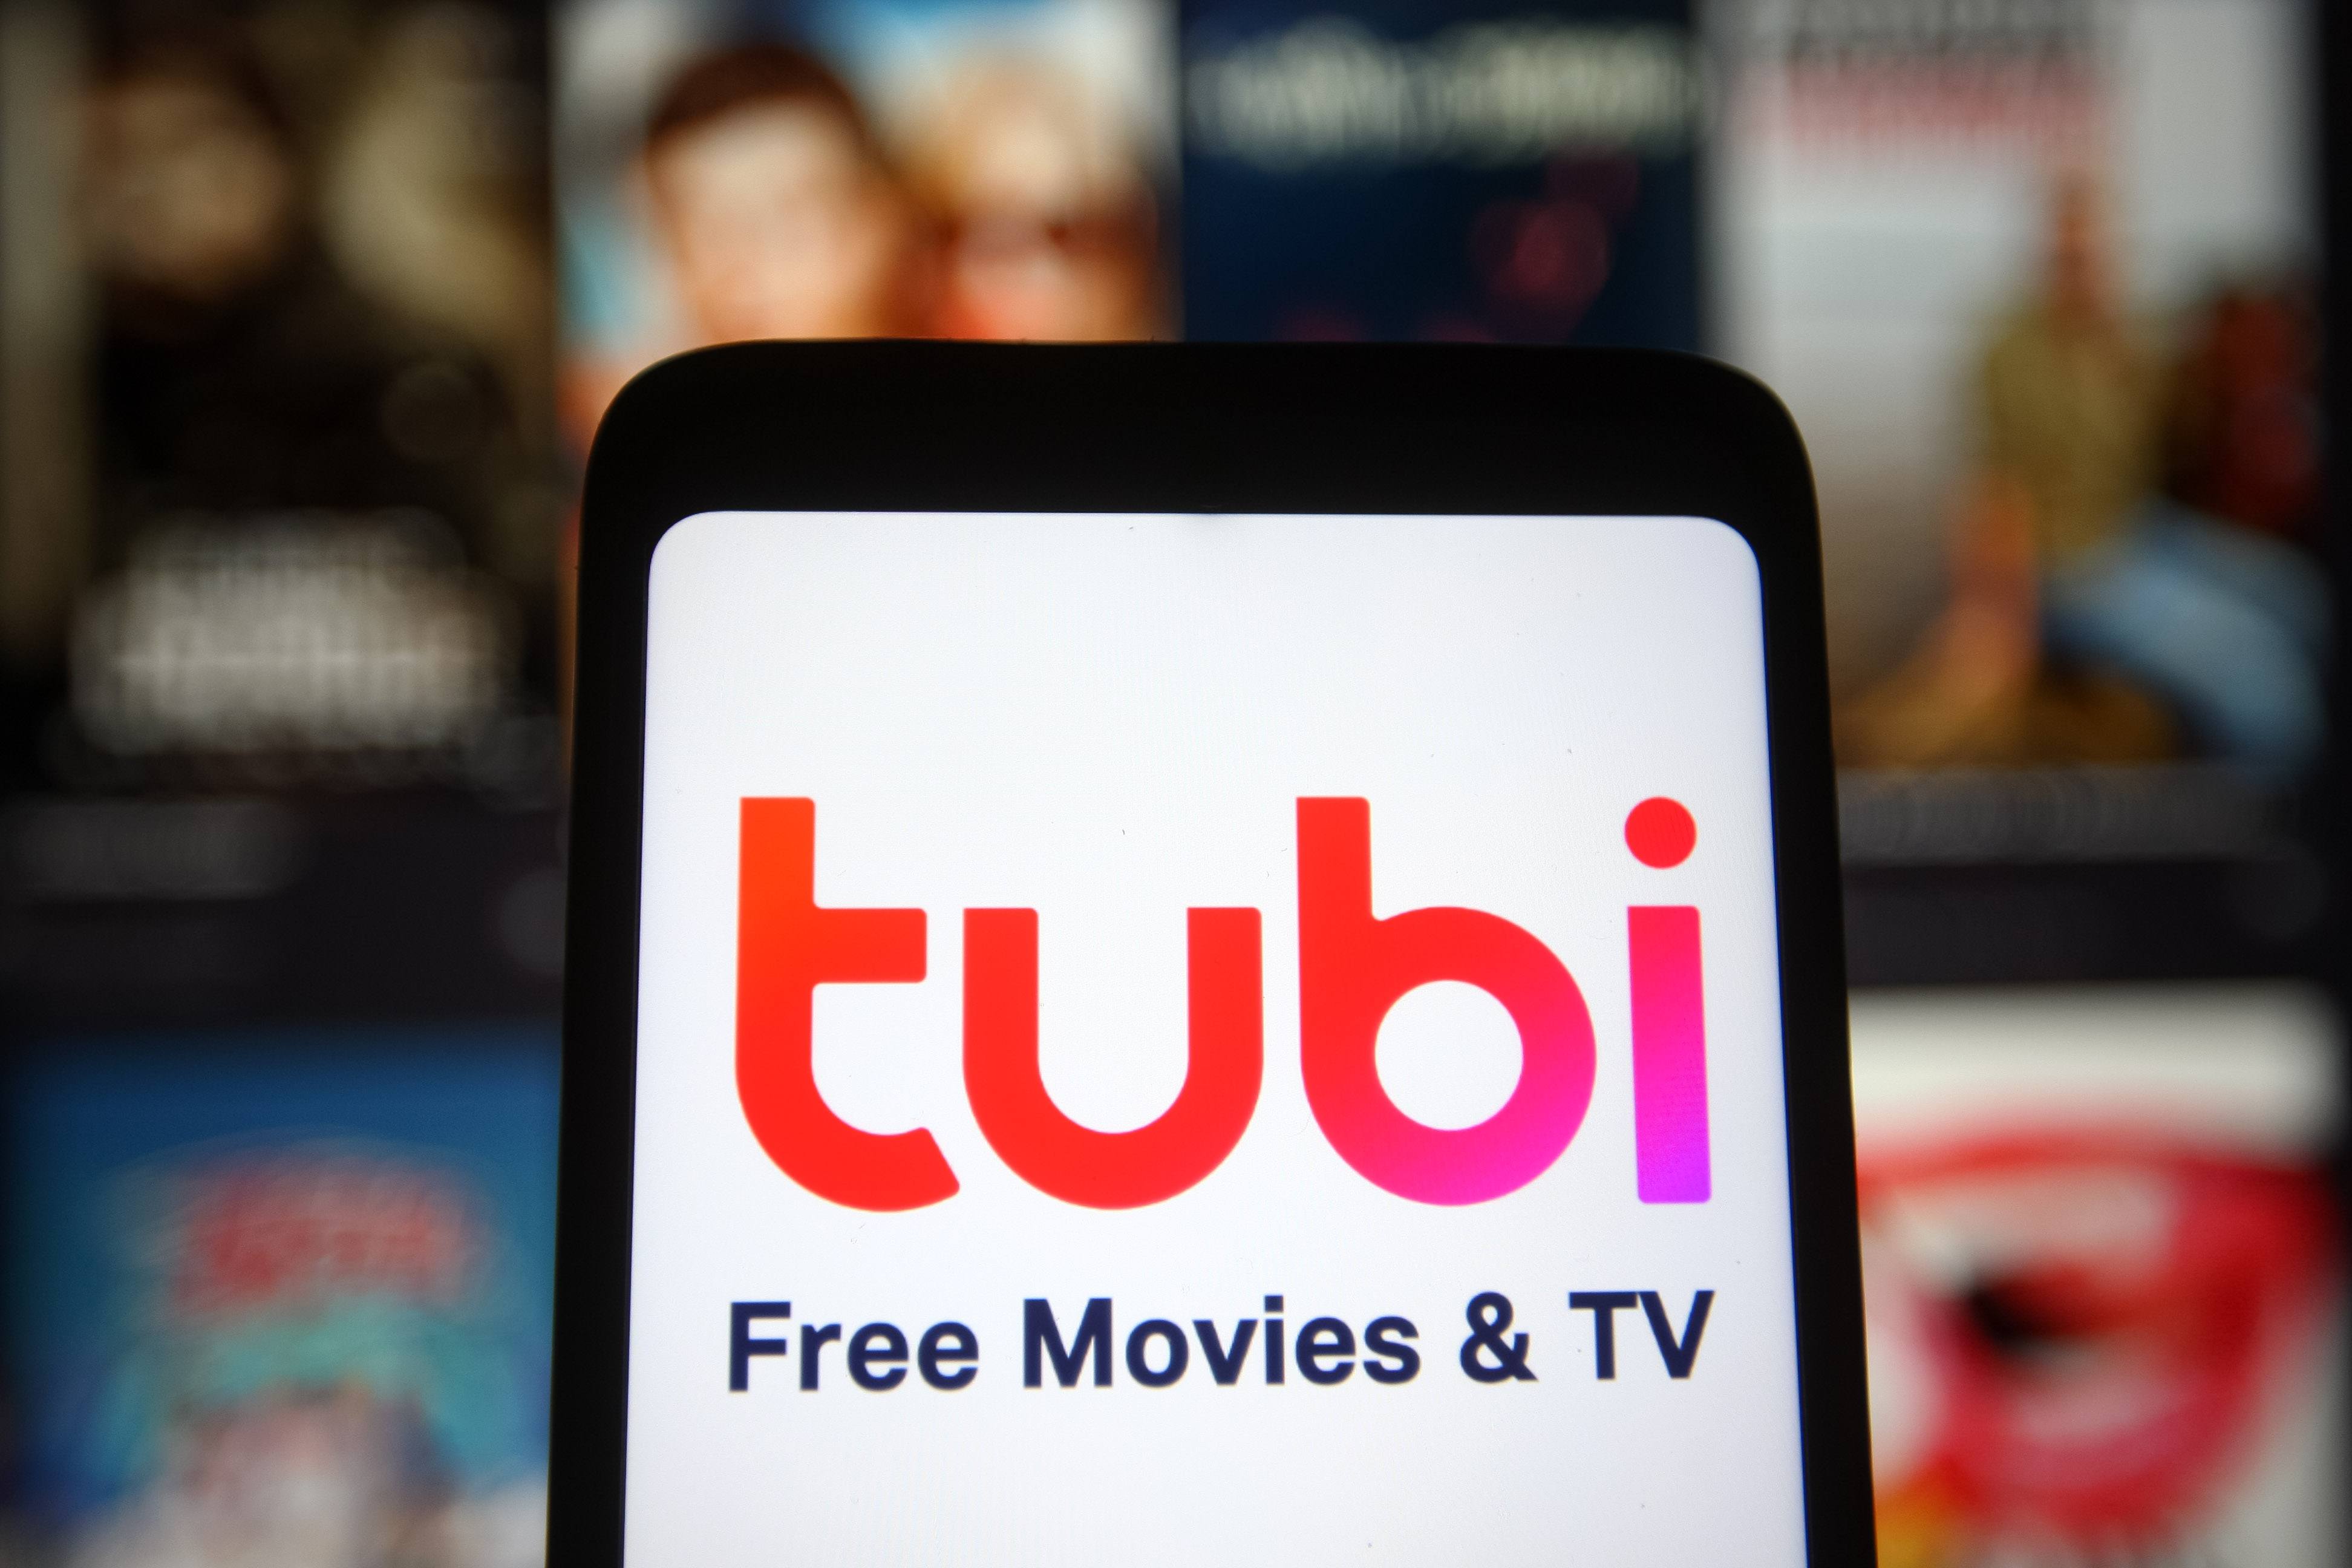 Fox Says Tubi's Consumption Levels Are On Par With a Top 5 Cable Network